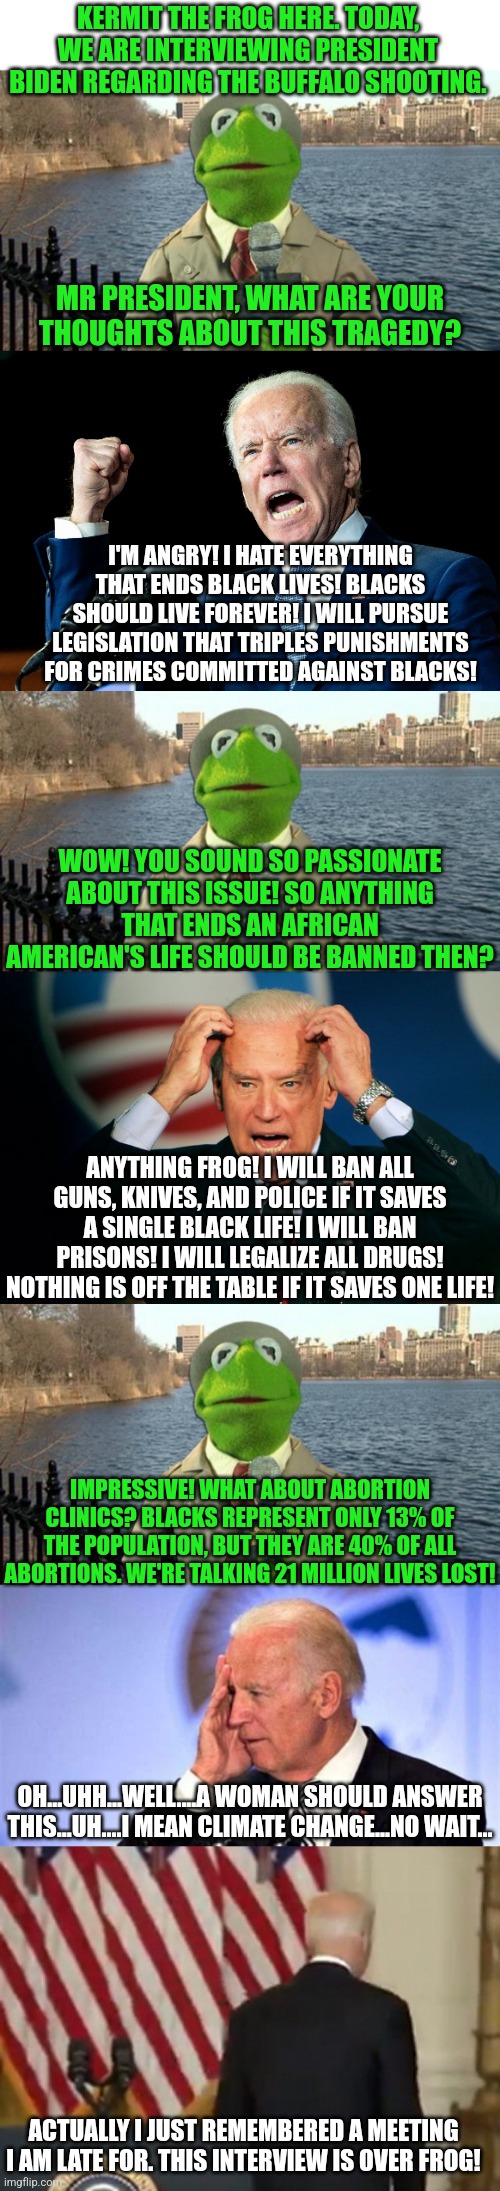 Black lives.....a favorite talking point for Democrats.....except when they're not. | KERMIT THE FROG HERE. TODAY, WE ARE INTERVIEWING PRESIDENT BIDEN REGARDING THE BUFFALO SHOOTING. MR PRESIDENT, WHAT ARE YOUR THOUGHTS ABOUT THIS TRAGEDY? I'M ANGRY! I HATE EVERYTHING THAT ENDS BLACK LIVES! BLACKS SHOULD LIVE FOREVER! I WILL PURSUE LEGISLATION THAT TRIPLES PUNISHMENTS FOR CRIMES COMMITTED AGAINST BLACKS! WOW! YOU SOUND SO PASSIONATE ABOUT THIS ISSUE! SO ANYTHING THAT ENDS AN AFRICAN AMERICAN'S LIFE SHOULD BE BANNED THEN? ANYTHING FROG! I WILL BAN ALL GUNS, KNIVES, AND POLICE IF IT SAVES A SINGLE BLACK LIFE! I WILL BAN PRISONS! I WILL LEGALIZE ALL DRUGS! NOTHING IS OFF THE TABLE IF IT SAVES ONE LIFE! IMPRESSIVE! WHAT ABOUT ABORTION CLINICS? BLACKS REPRESENT ONLY 13% OF THE POPULATION, BUT THEY ARE 40% OF ALL ABORTIONS. WE'RE TALKING 21 MILLION LIVES LOST! OH...UHH...WELL....A WOMAN SHOULD ANSWER THIS...UH....I MEAN CLIMATE CHANGE...NO WAIT... ACTUALLY I JUST REMEMBERED A MEETING I AM LATE FOR. THIS INTERVIEW IS OVER FROG! | image tagged in kermit news report,confused biden,liberal hypocrisy,biased media,lies,liberals | made w/ Imgflip meme maker